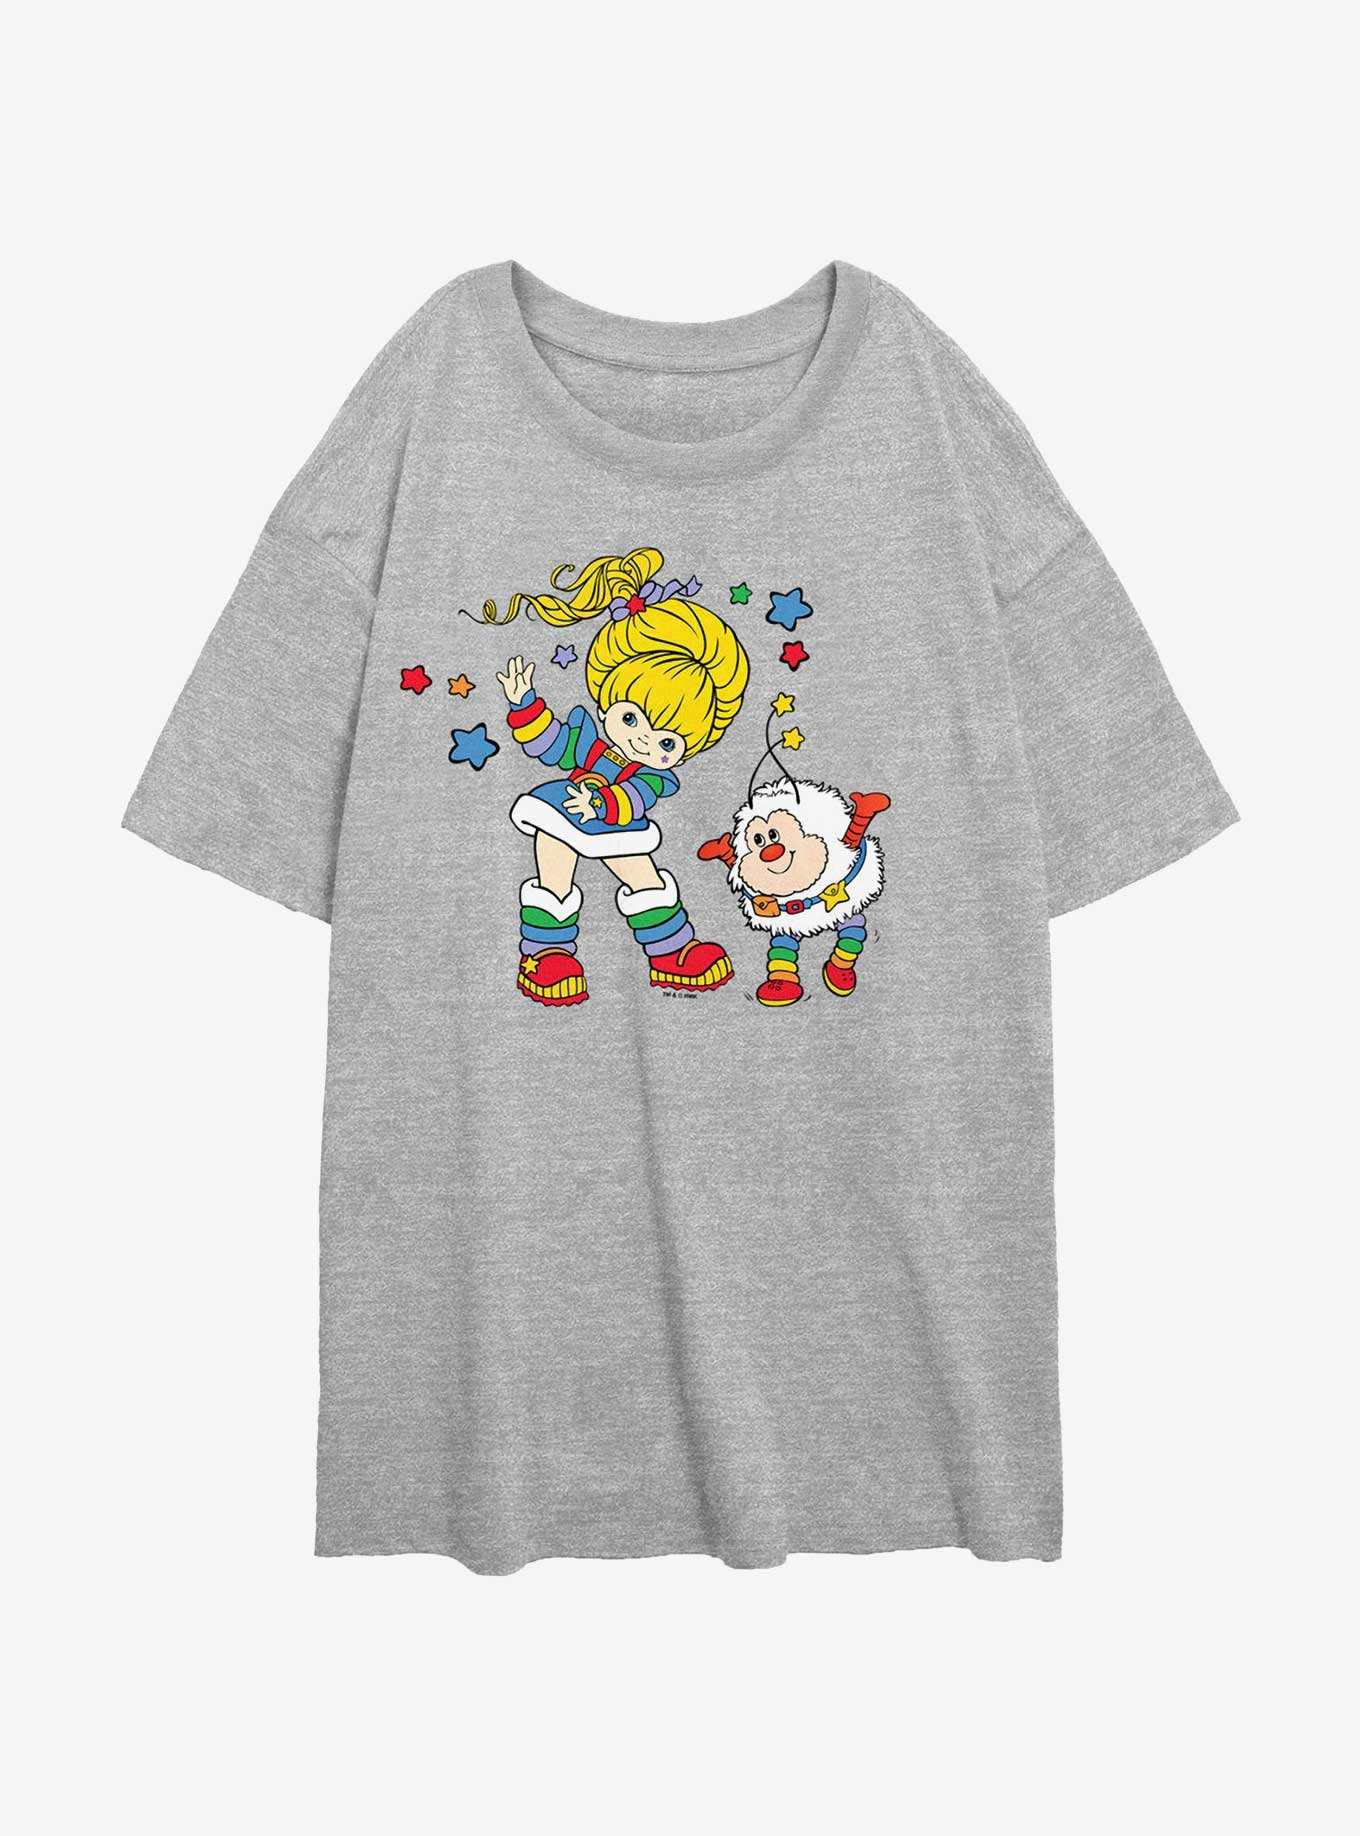 Rainbow Brite and Twink Girls Oversized T-Shirt, , hi-res